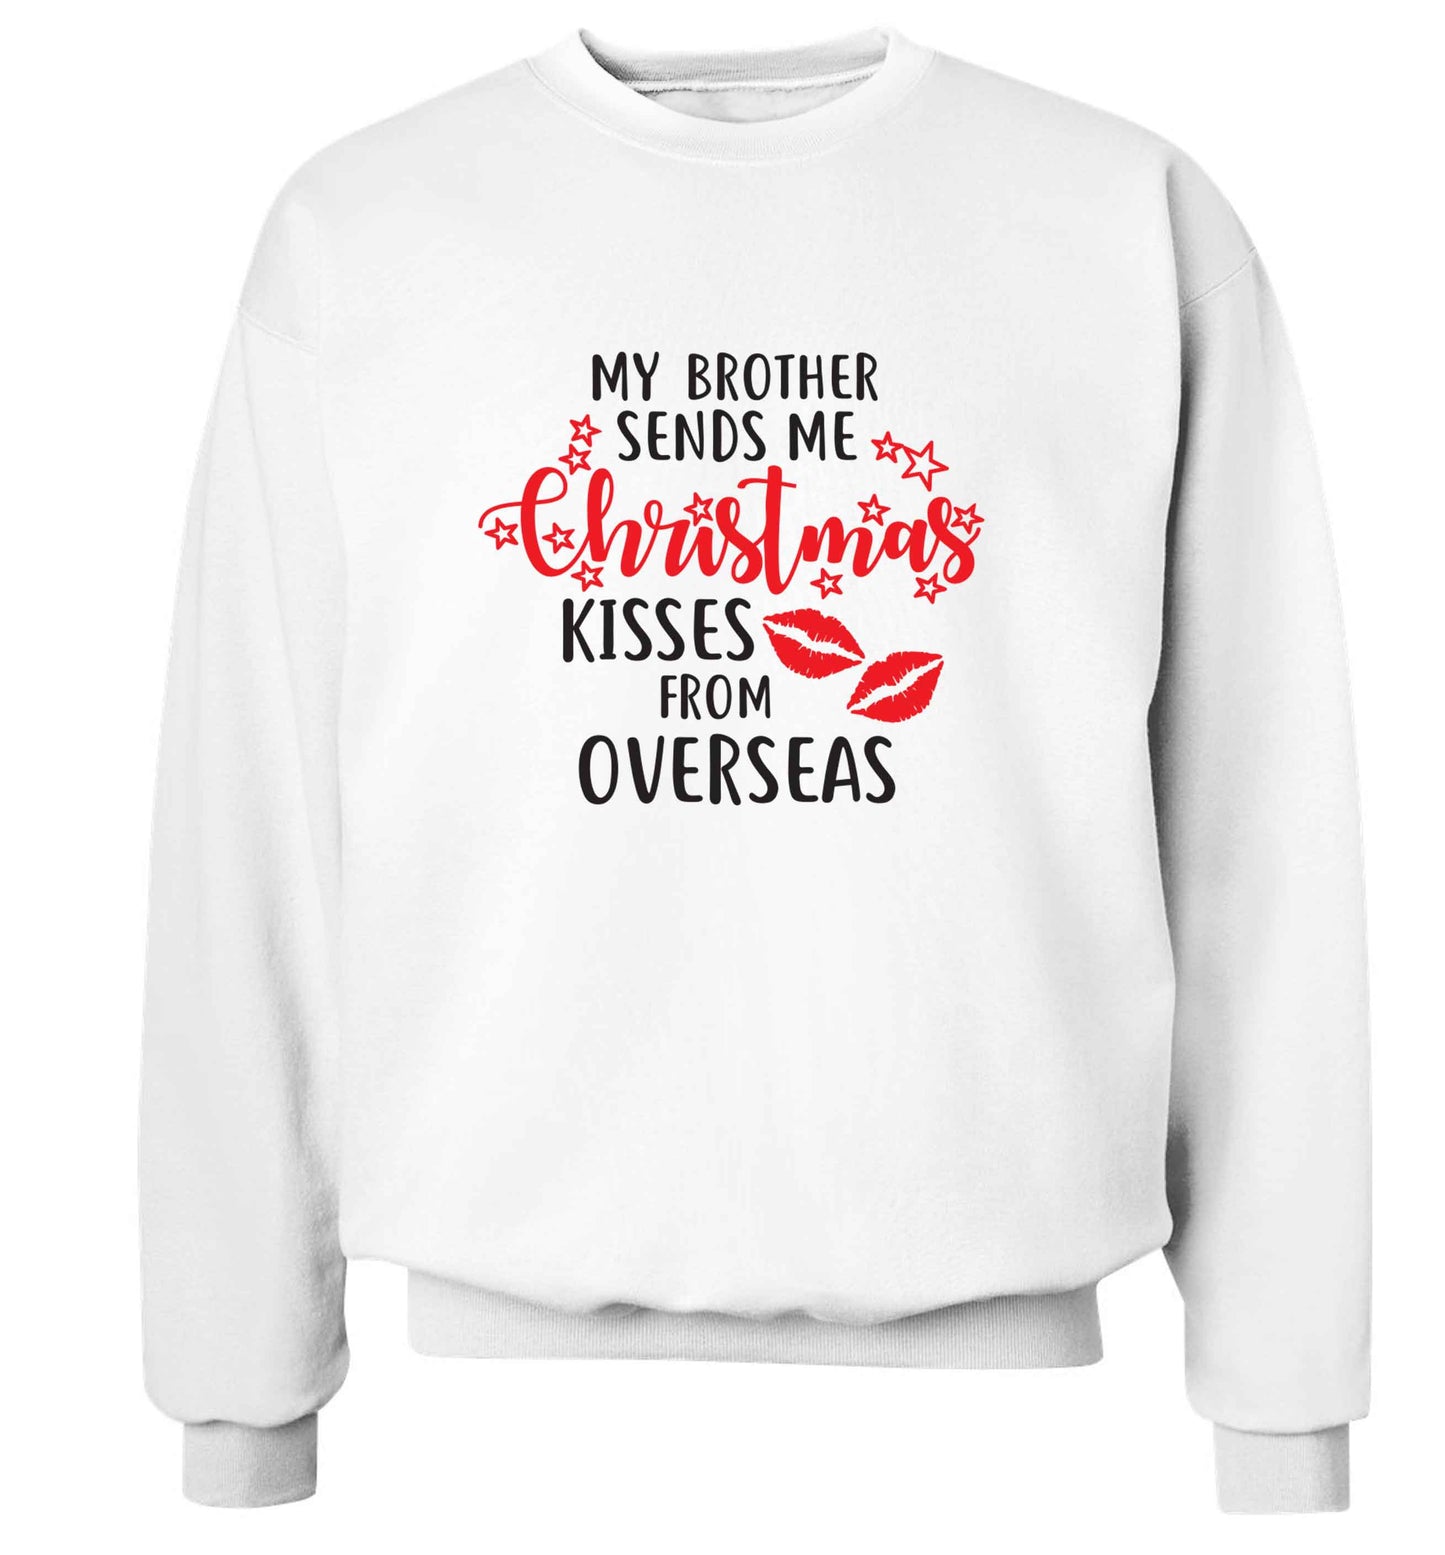 Brother Christmas Kisses Overseas adult's unisex white sweater 2XL